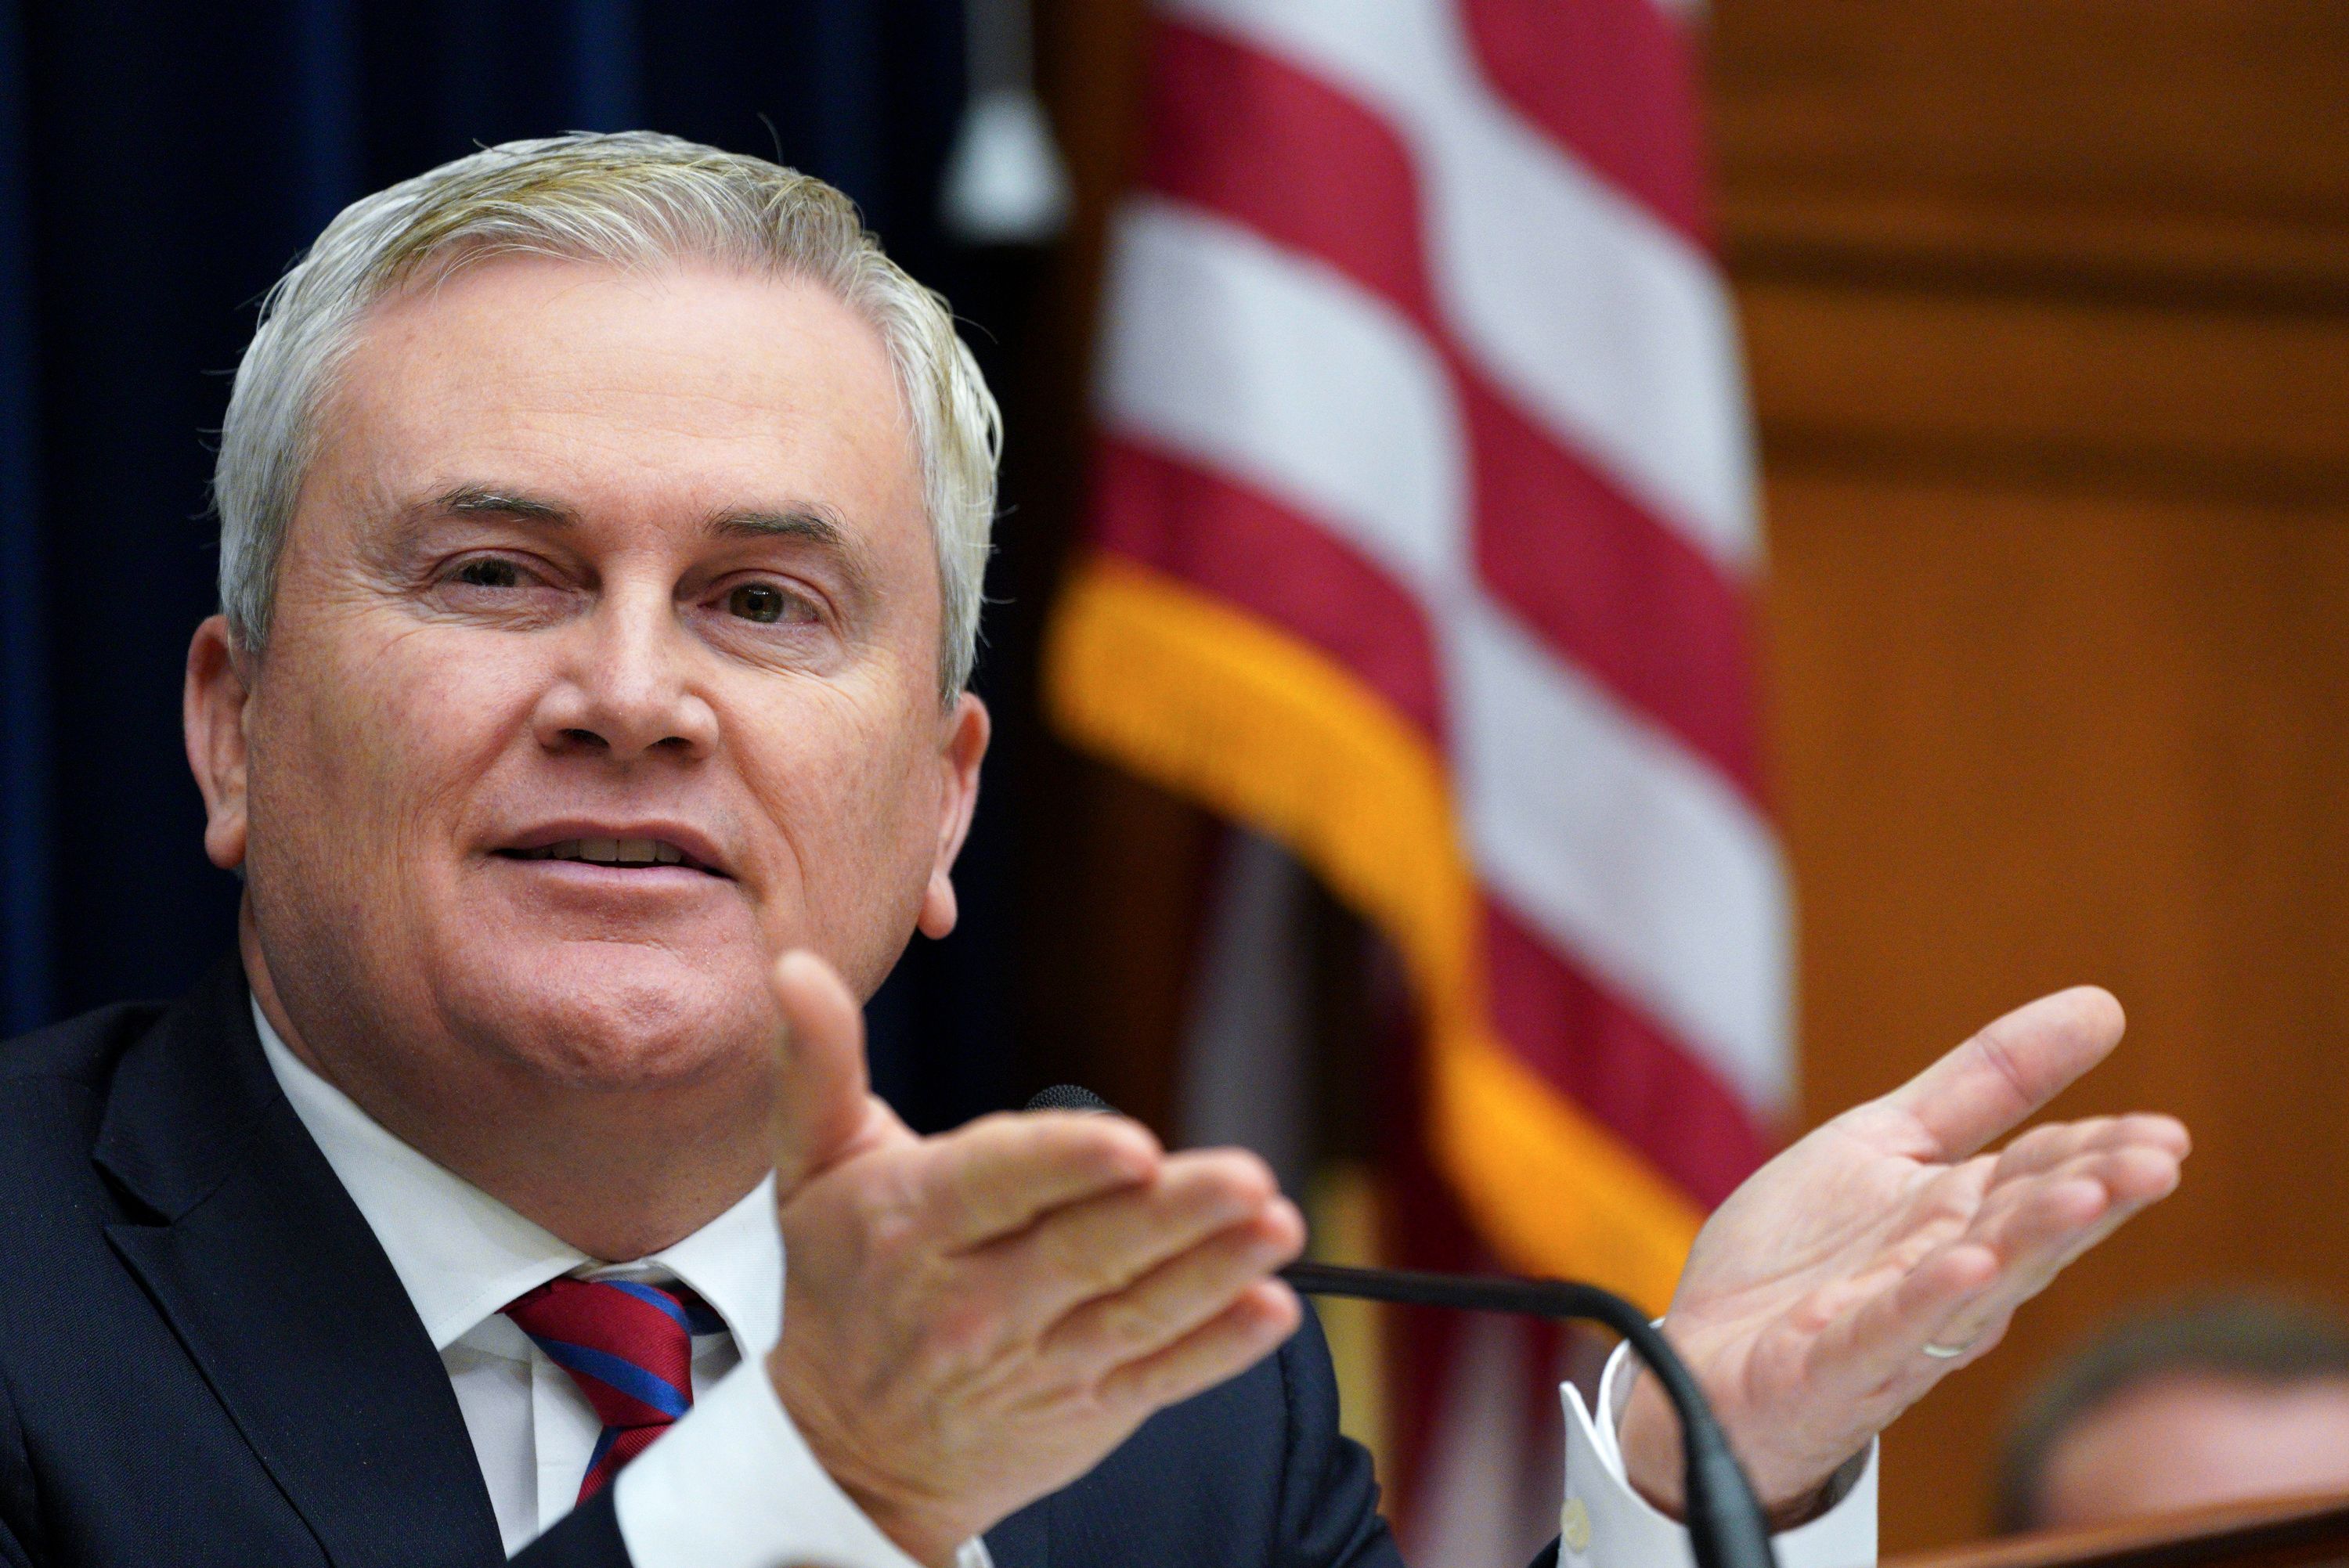 James Comer says Treasury will allow Oversight Committee to review certain  bank activity reports related to Biden family and business partners | CNN  Politics